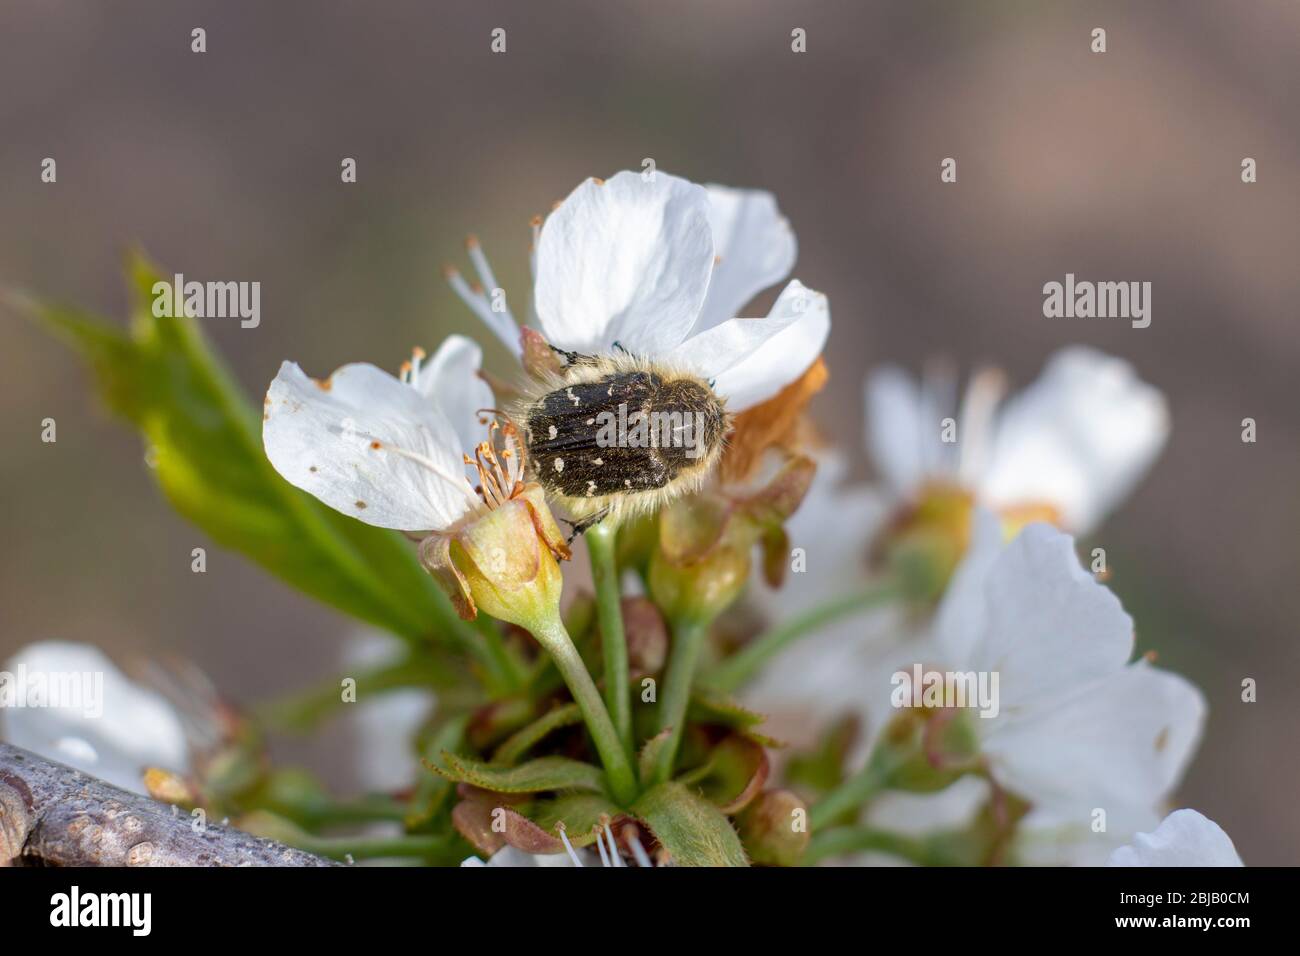 Tropinota hirta, a pest that destroys the flowering plants, feeds on flowers and buds of plants, Beetle that eats apricot inflorescences. Stock Photo